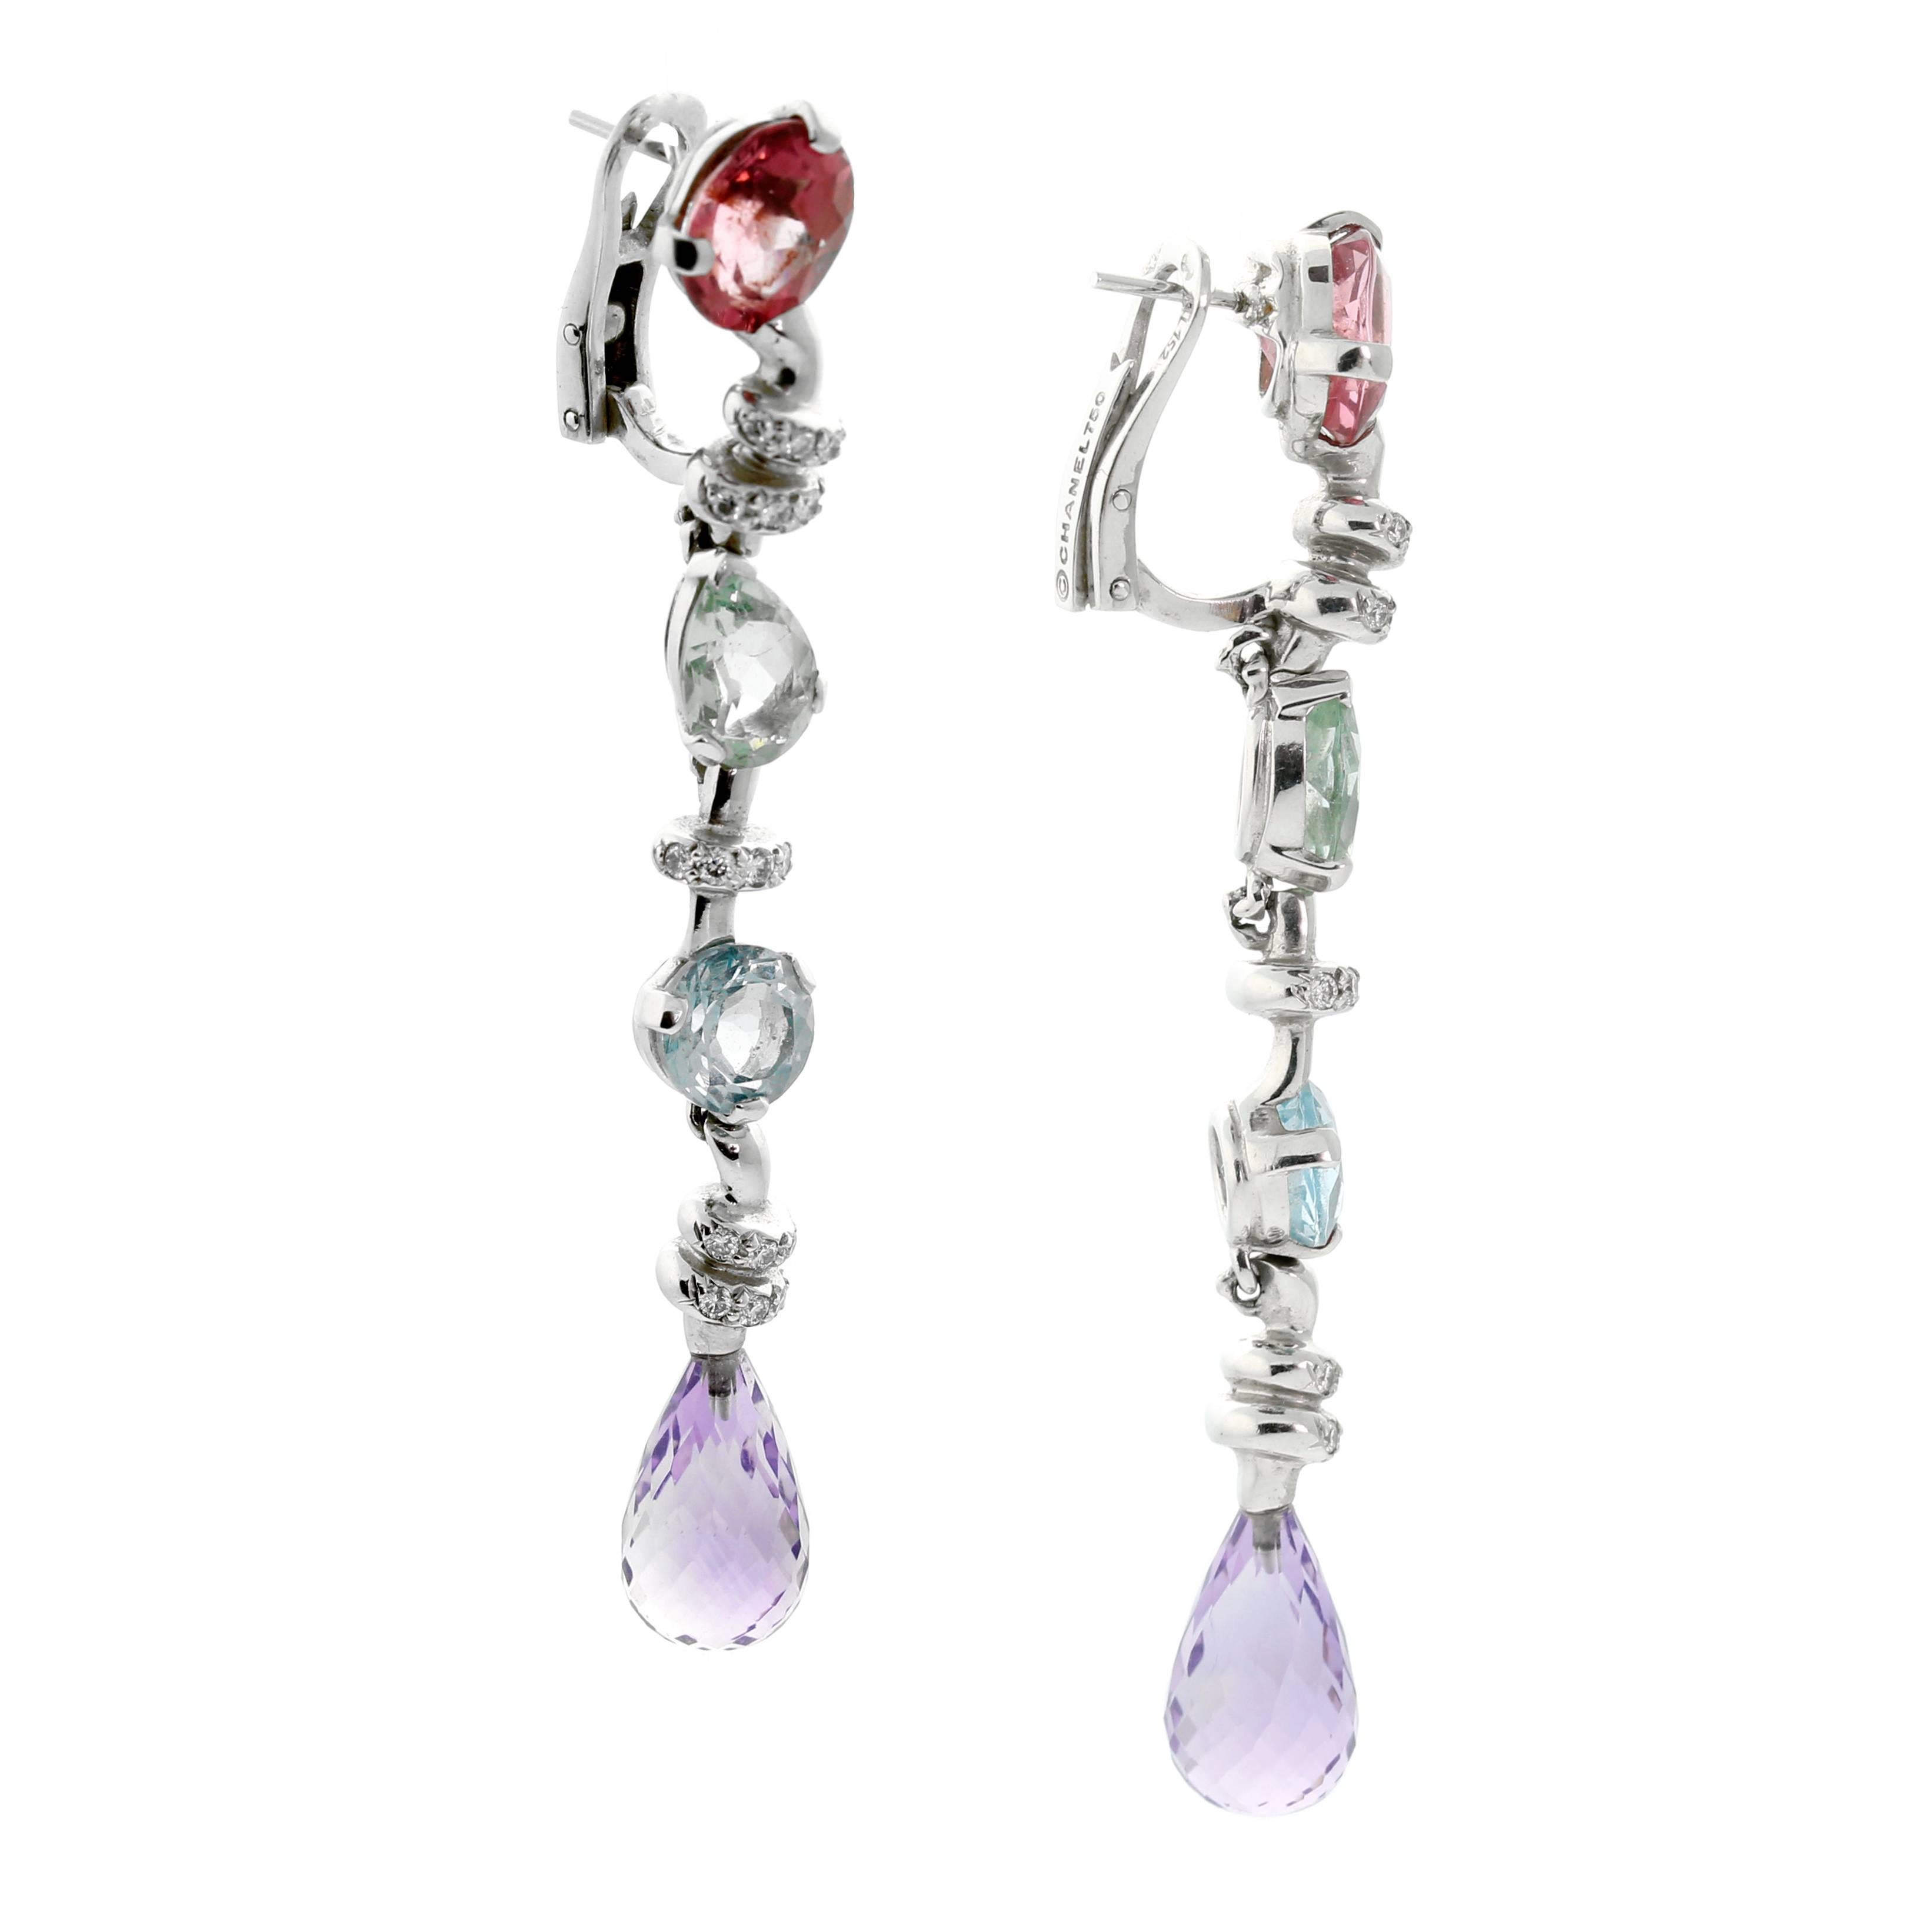 A fabulous pair of Chanel earrings featuring various gemstones illuminated by the finest Chanel round brilliant cut diamonds set in 18k white gold.

Inventory ID: 0000563